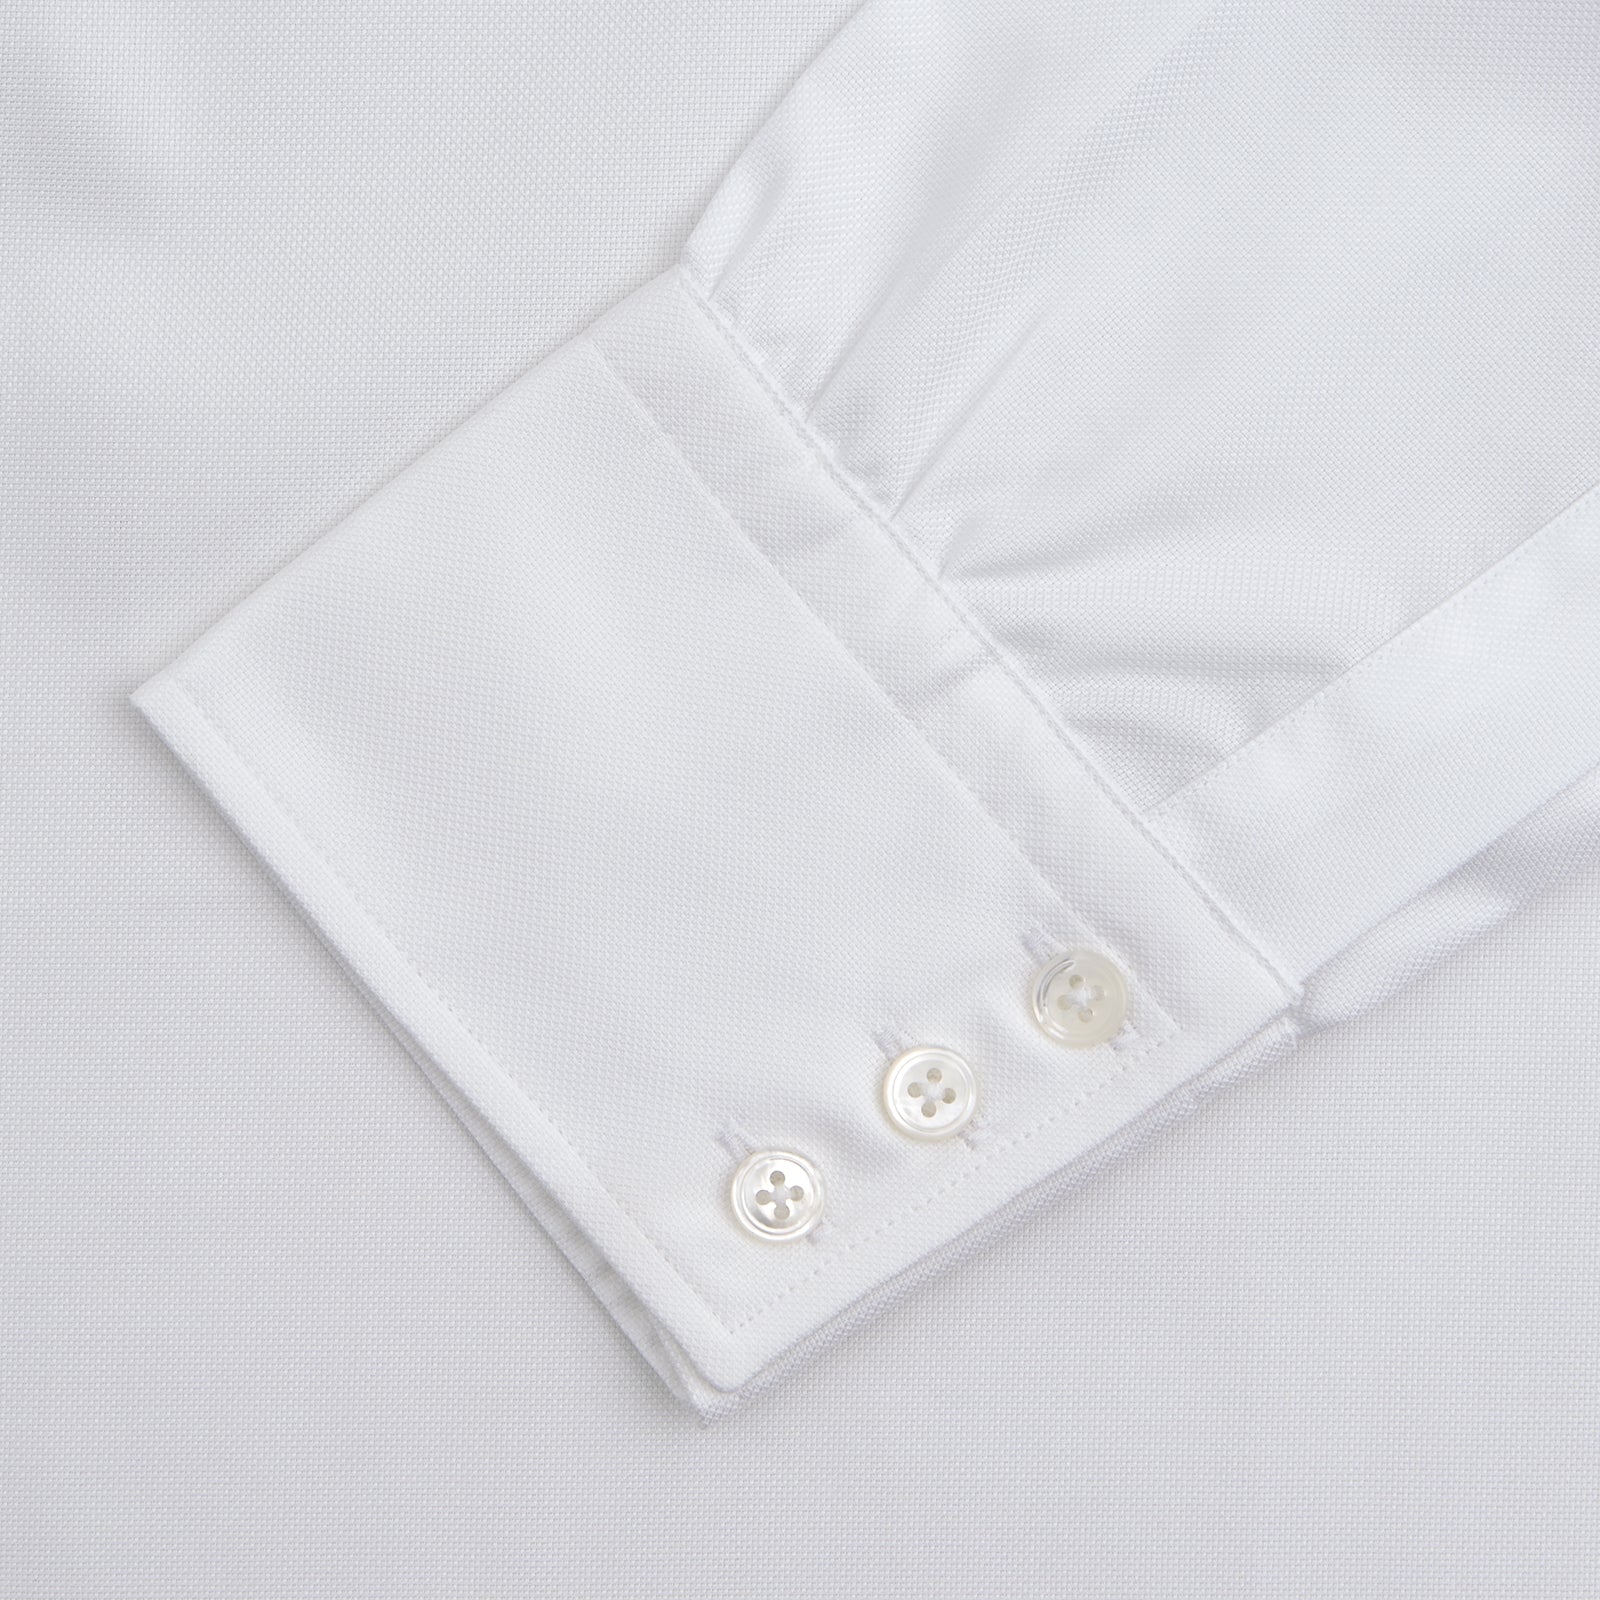 White Superfine Oxford Cotton Shirt with T&A Collar and 3-Button Cuffs